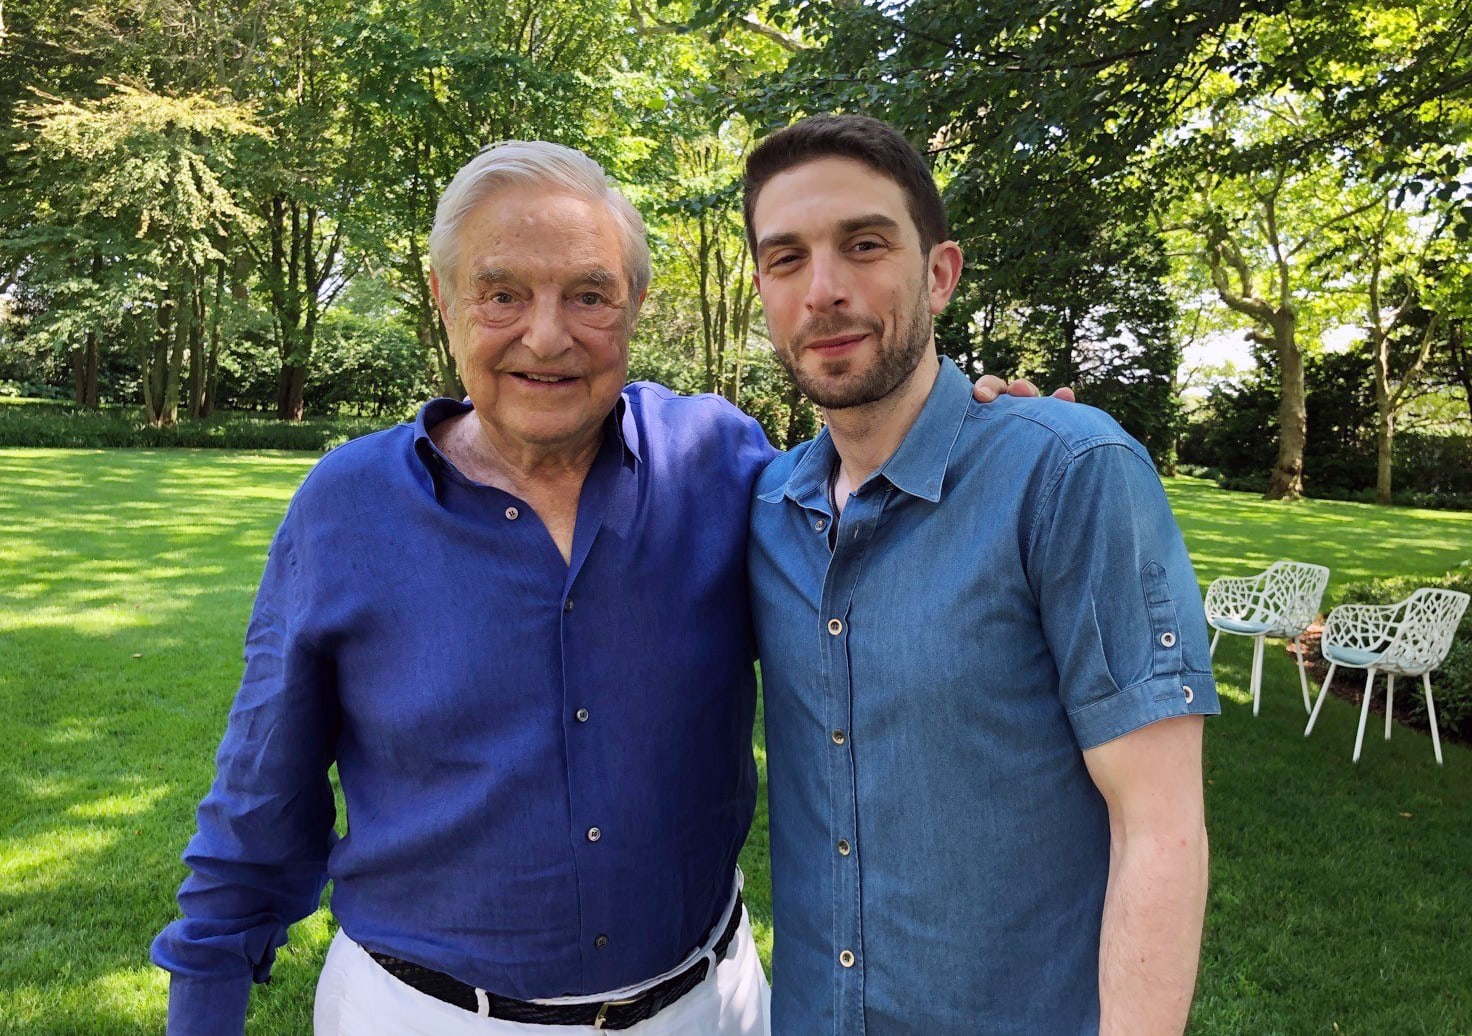 My father, George Soros, is white supremacists' favorite target. But they  won't stop us.